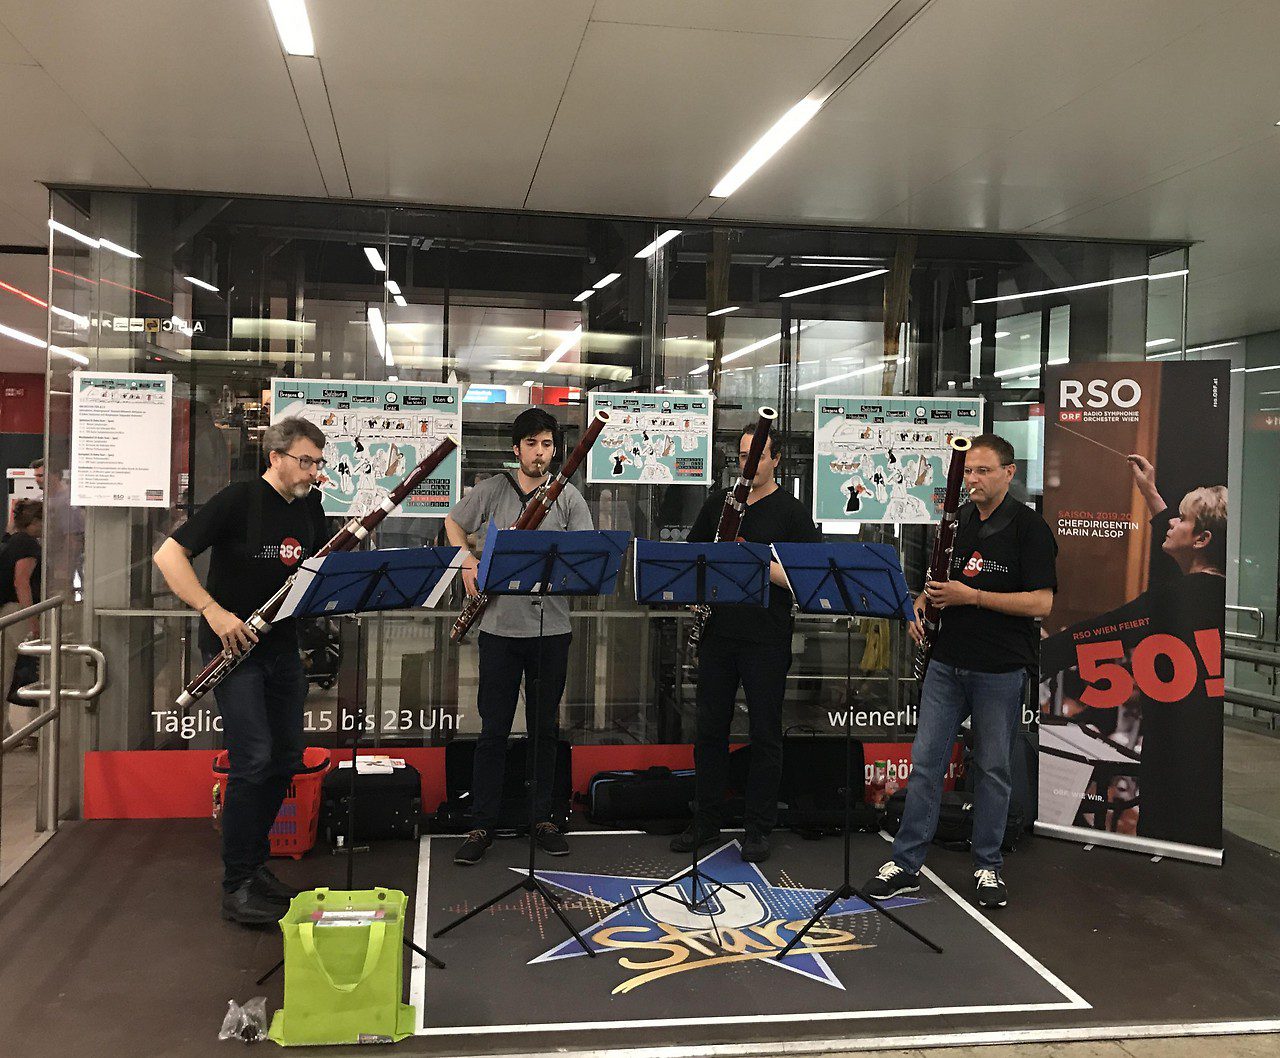 A four-piece radio symphony orchestra performs at a subway station